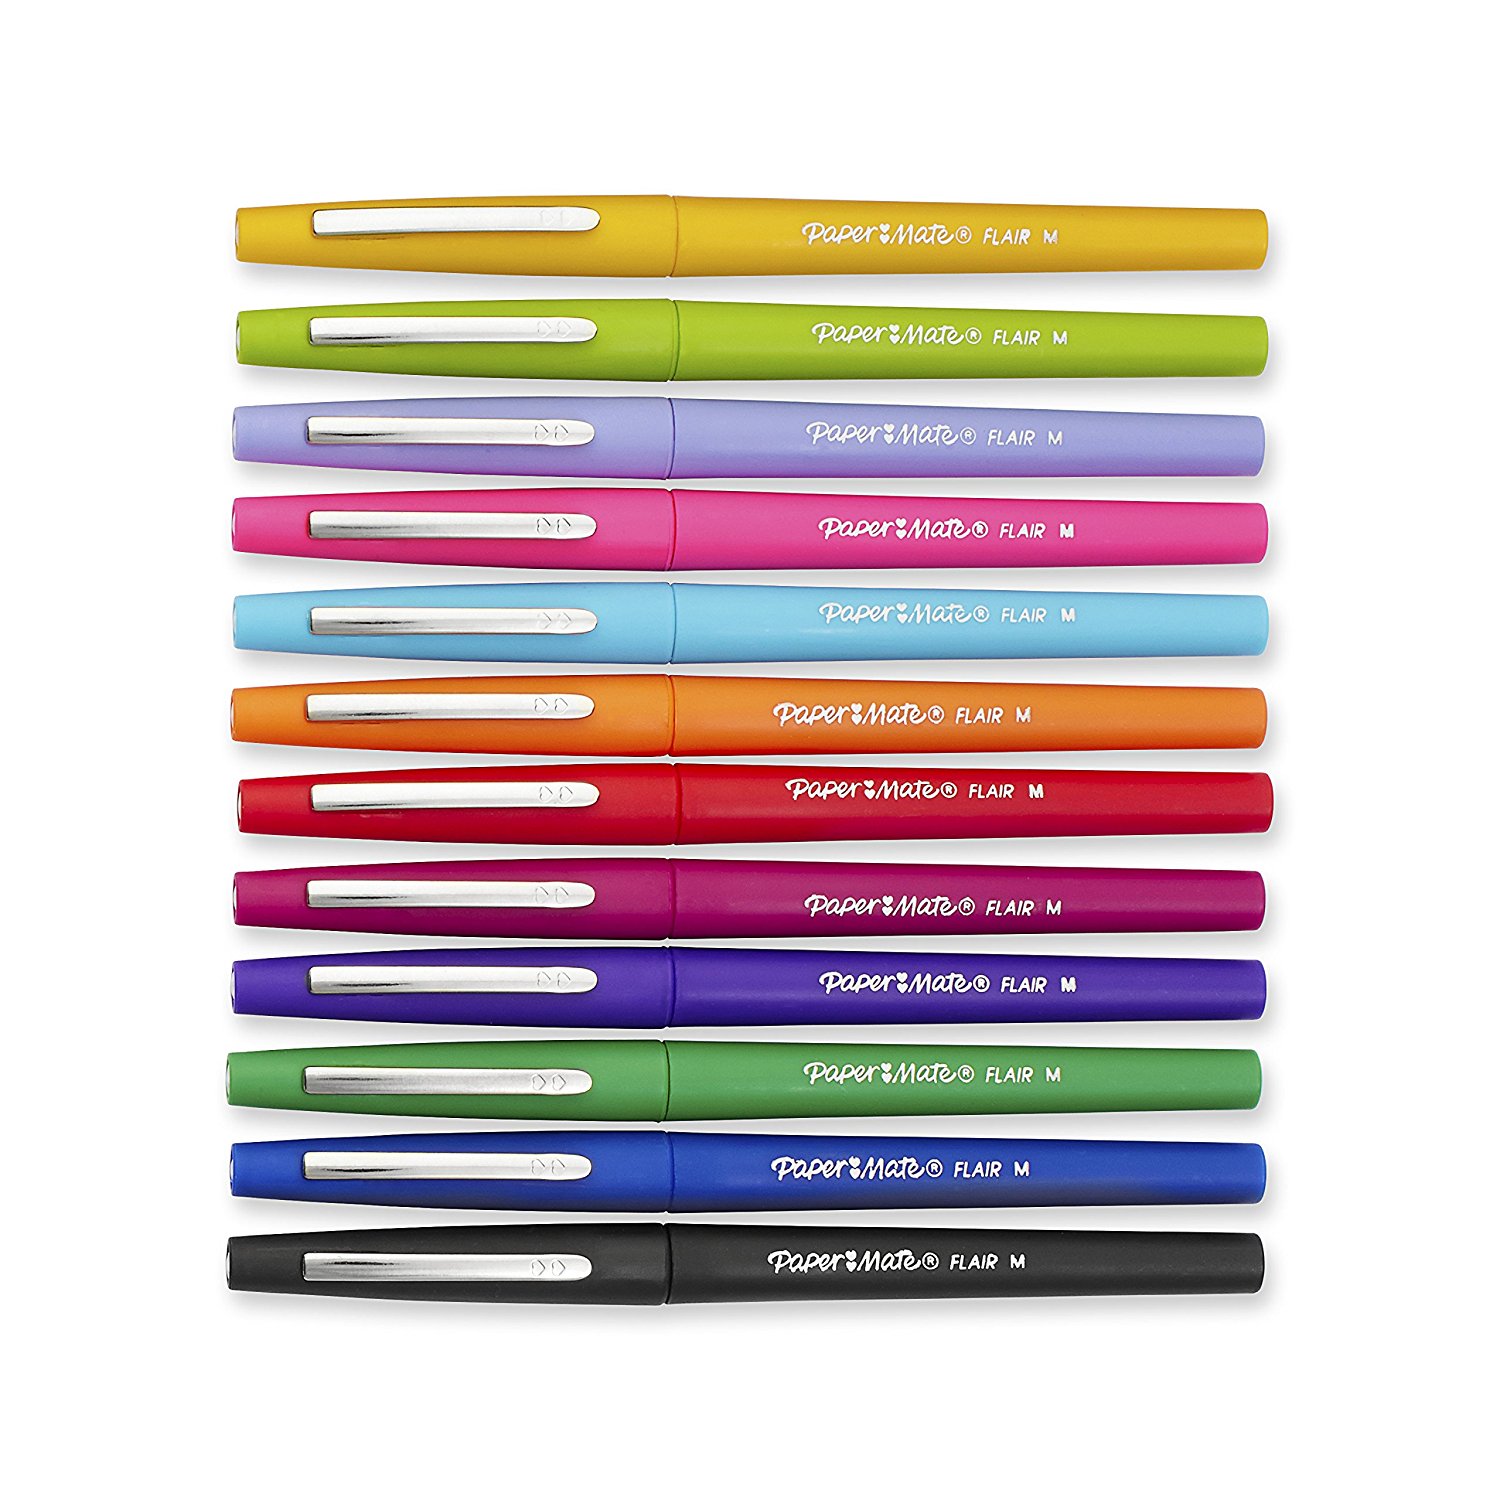 My love of pens, pencils and highlighters – Angela Harkness